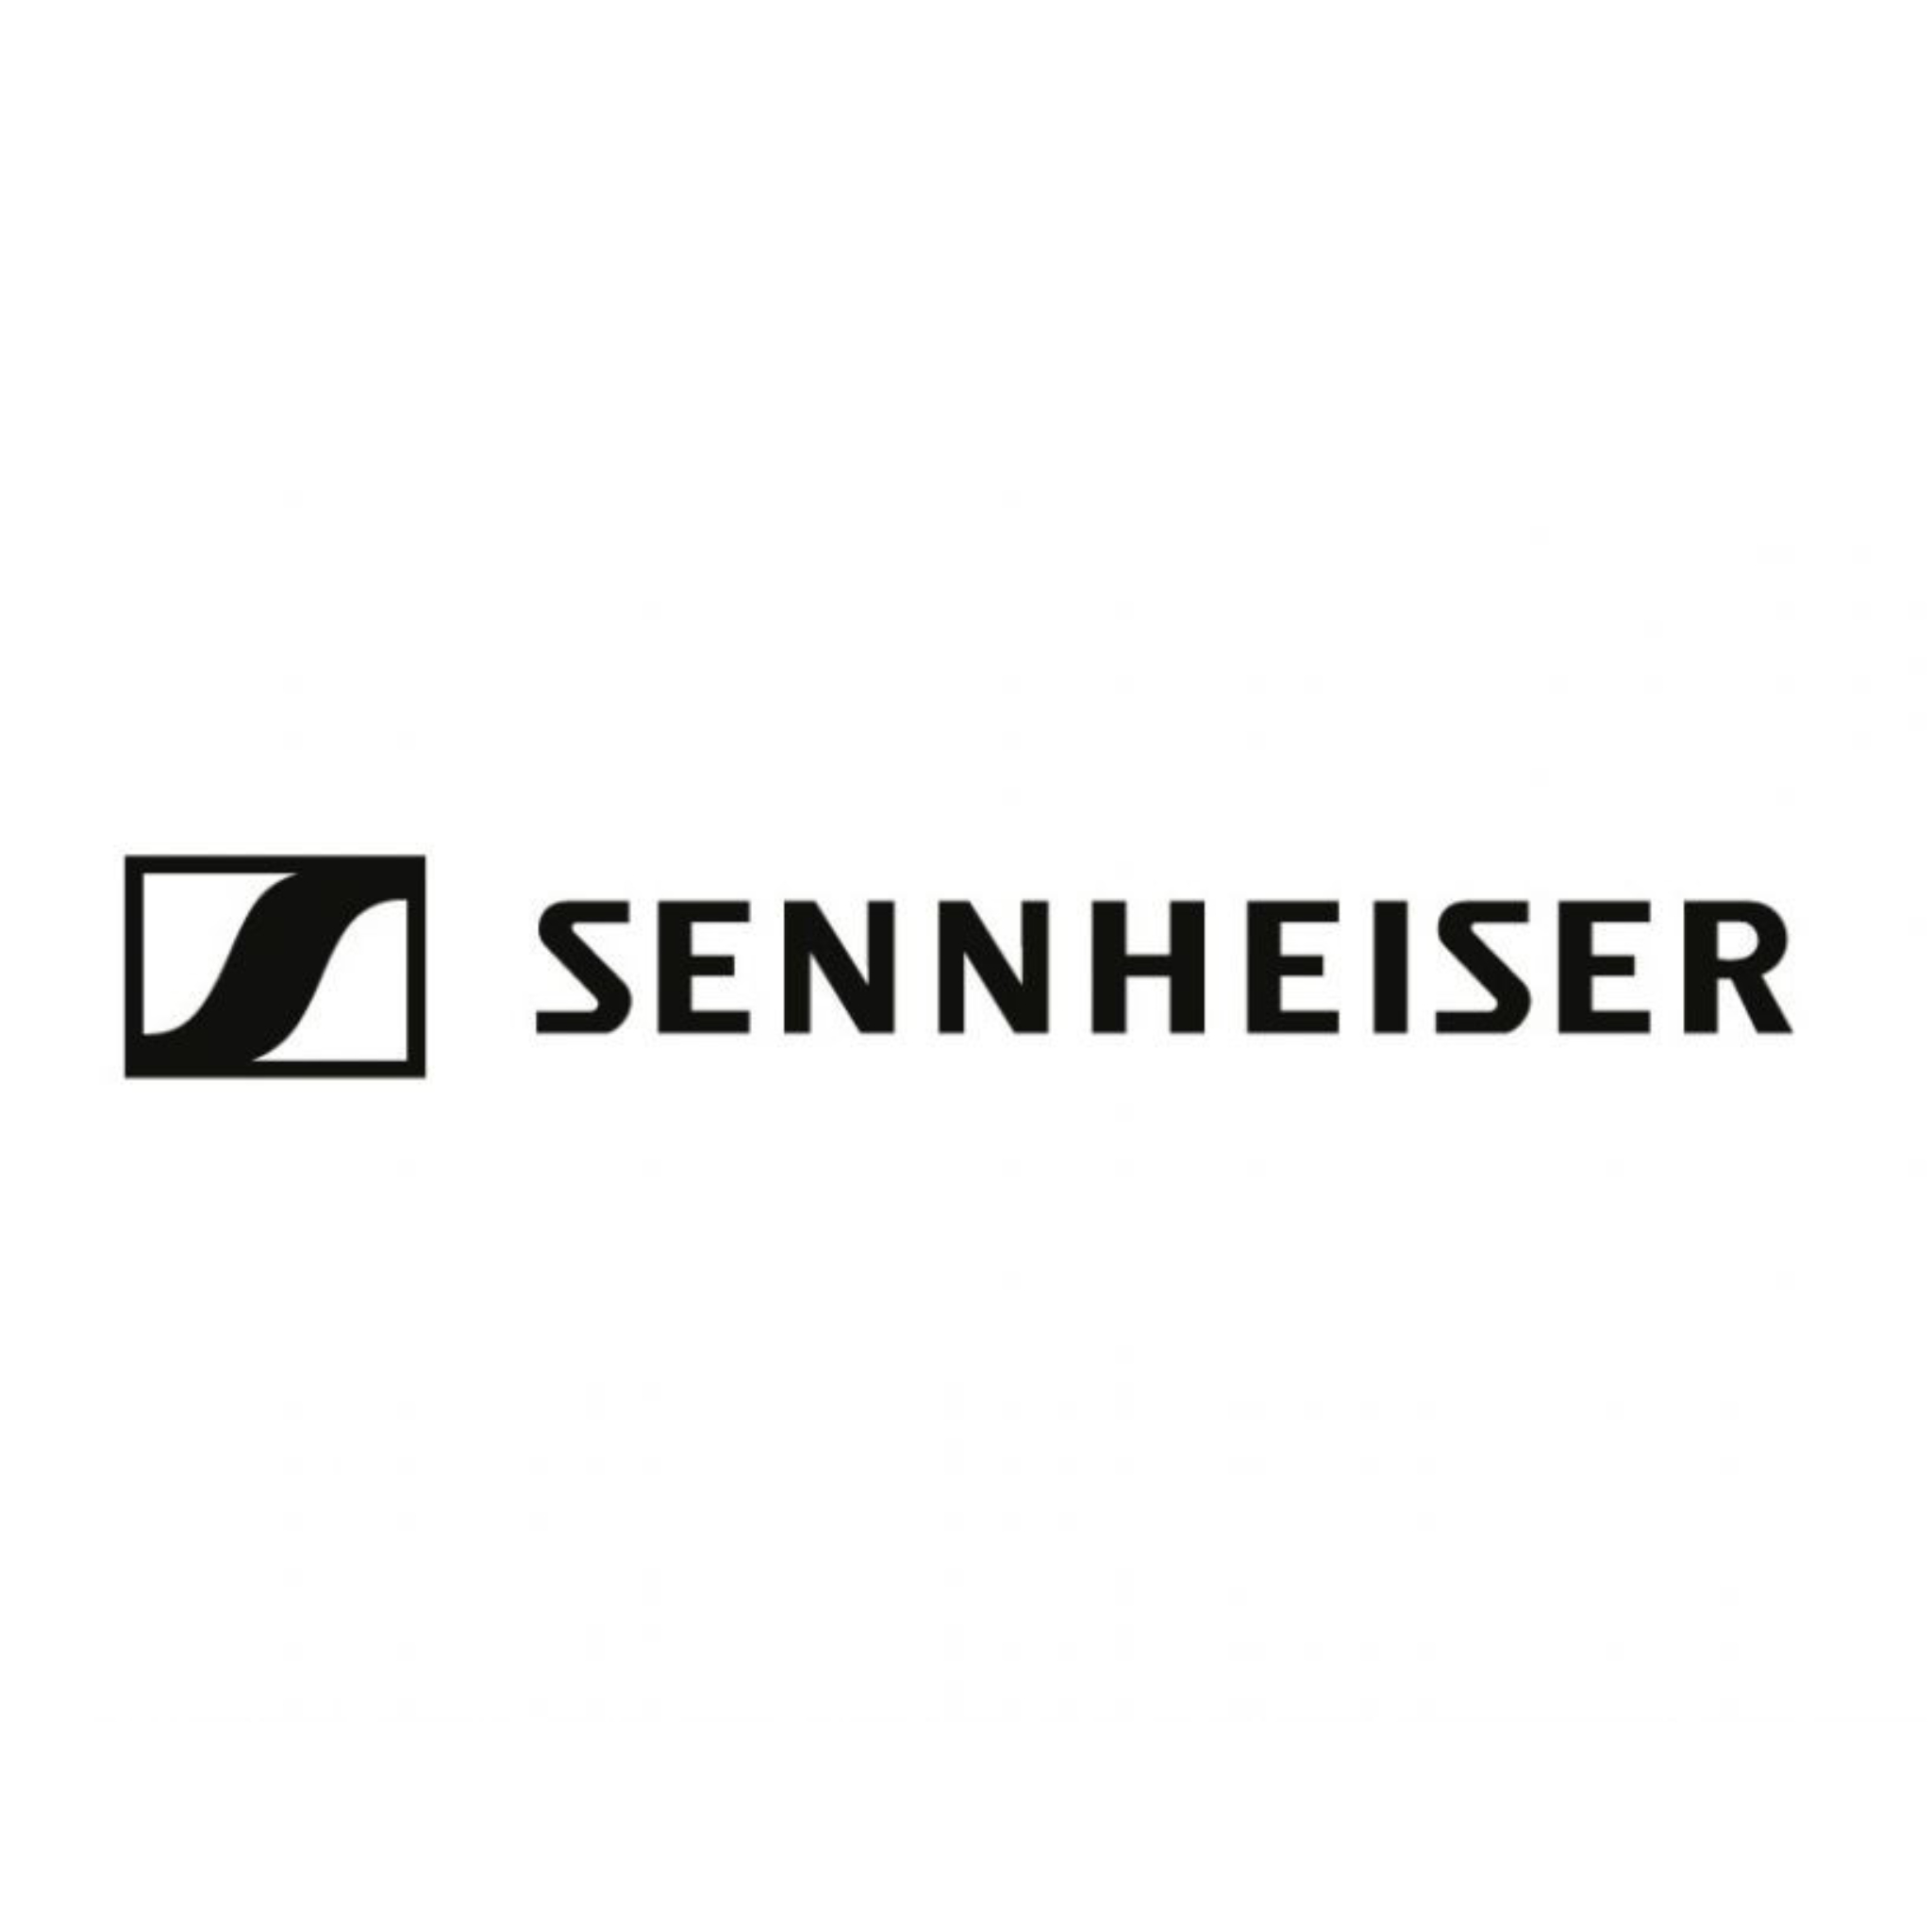 Sennheiser announces striking deals on its best-selling products during the Amazon Great Republic Day Sale-thumnail